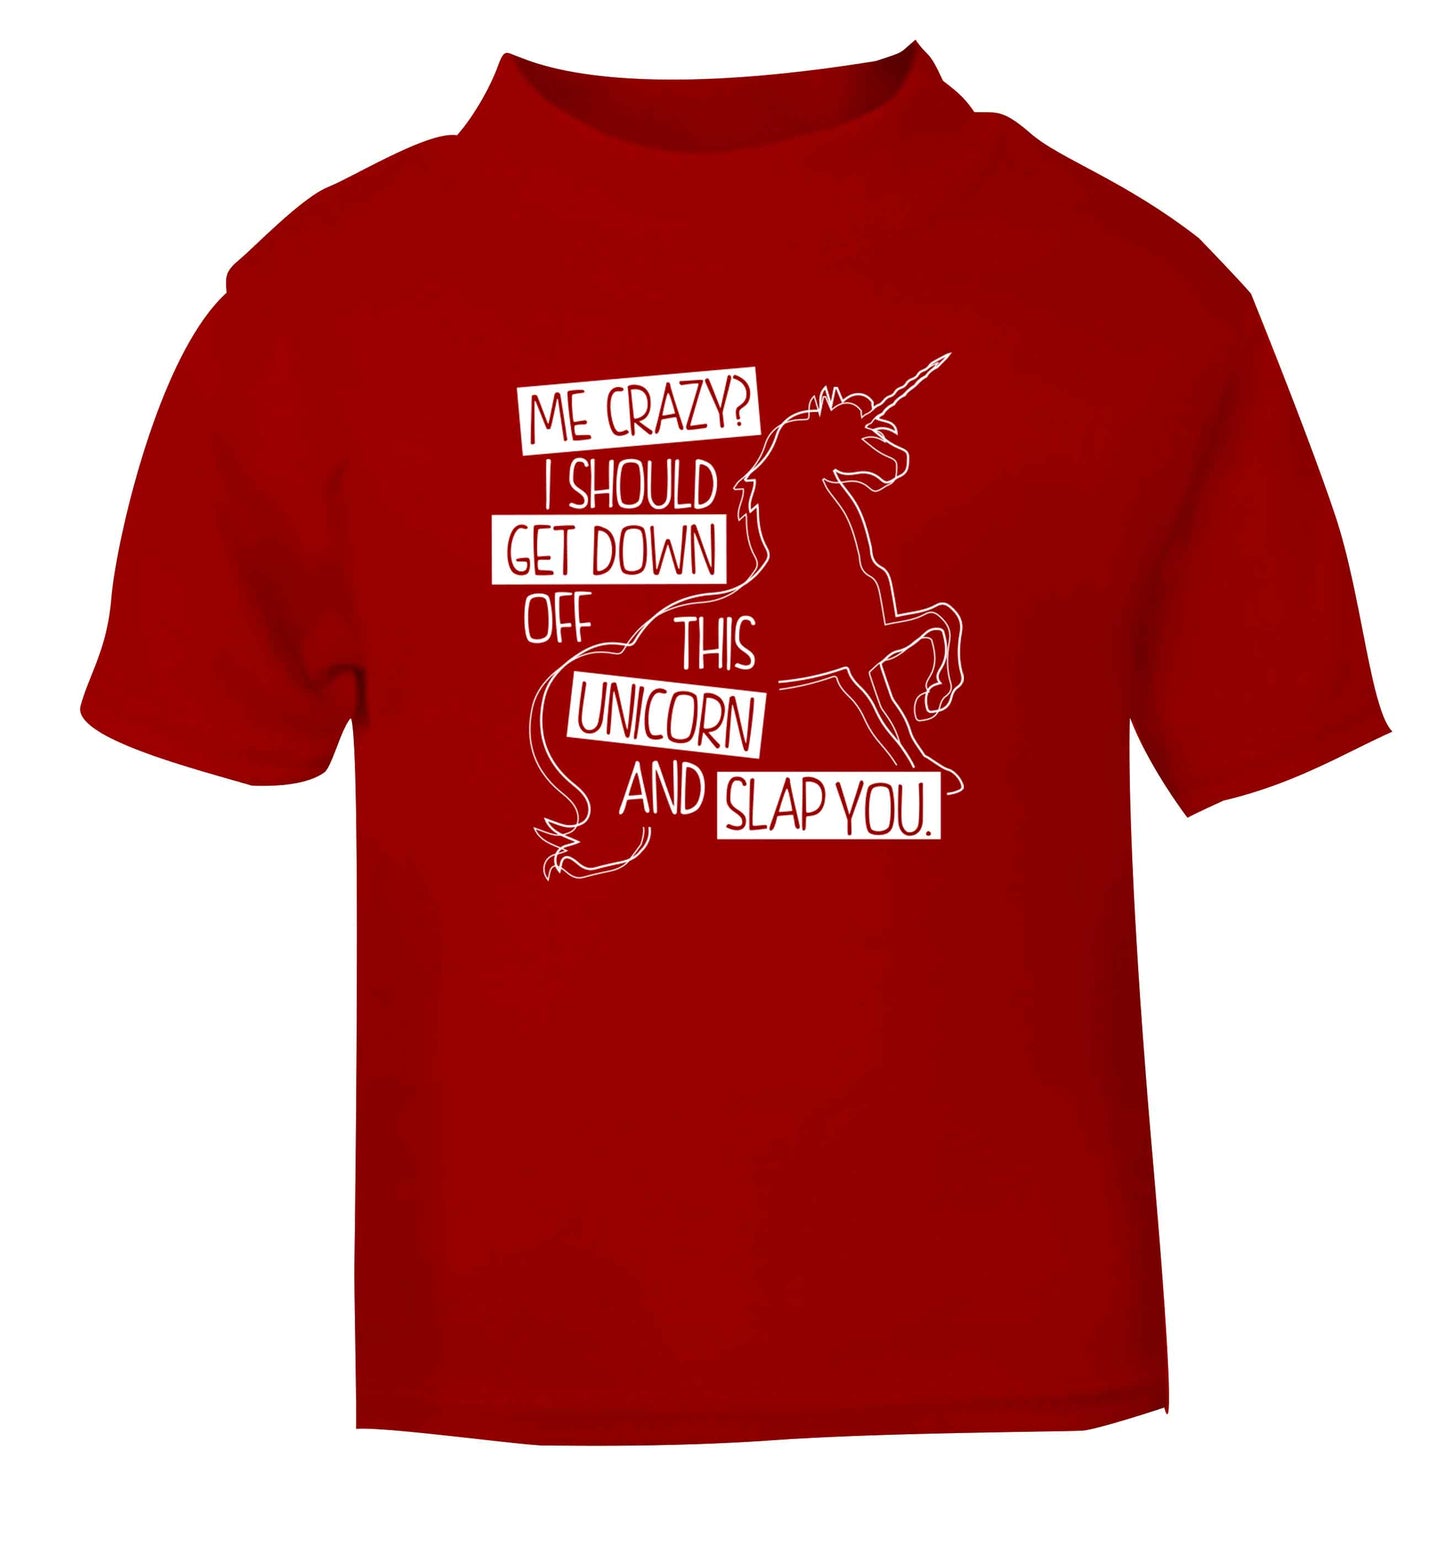 Me crazy? I should get down off this unicorn and slap you red Baby Toddler Tshirt 2 Years